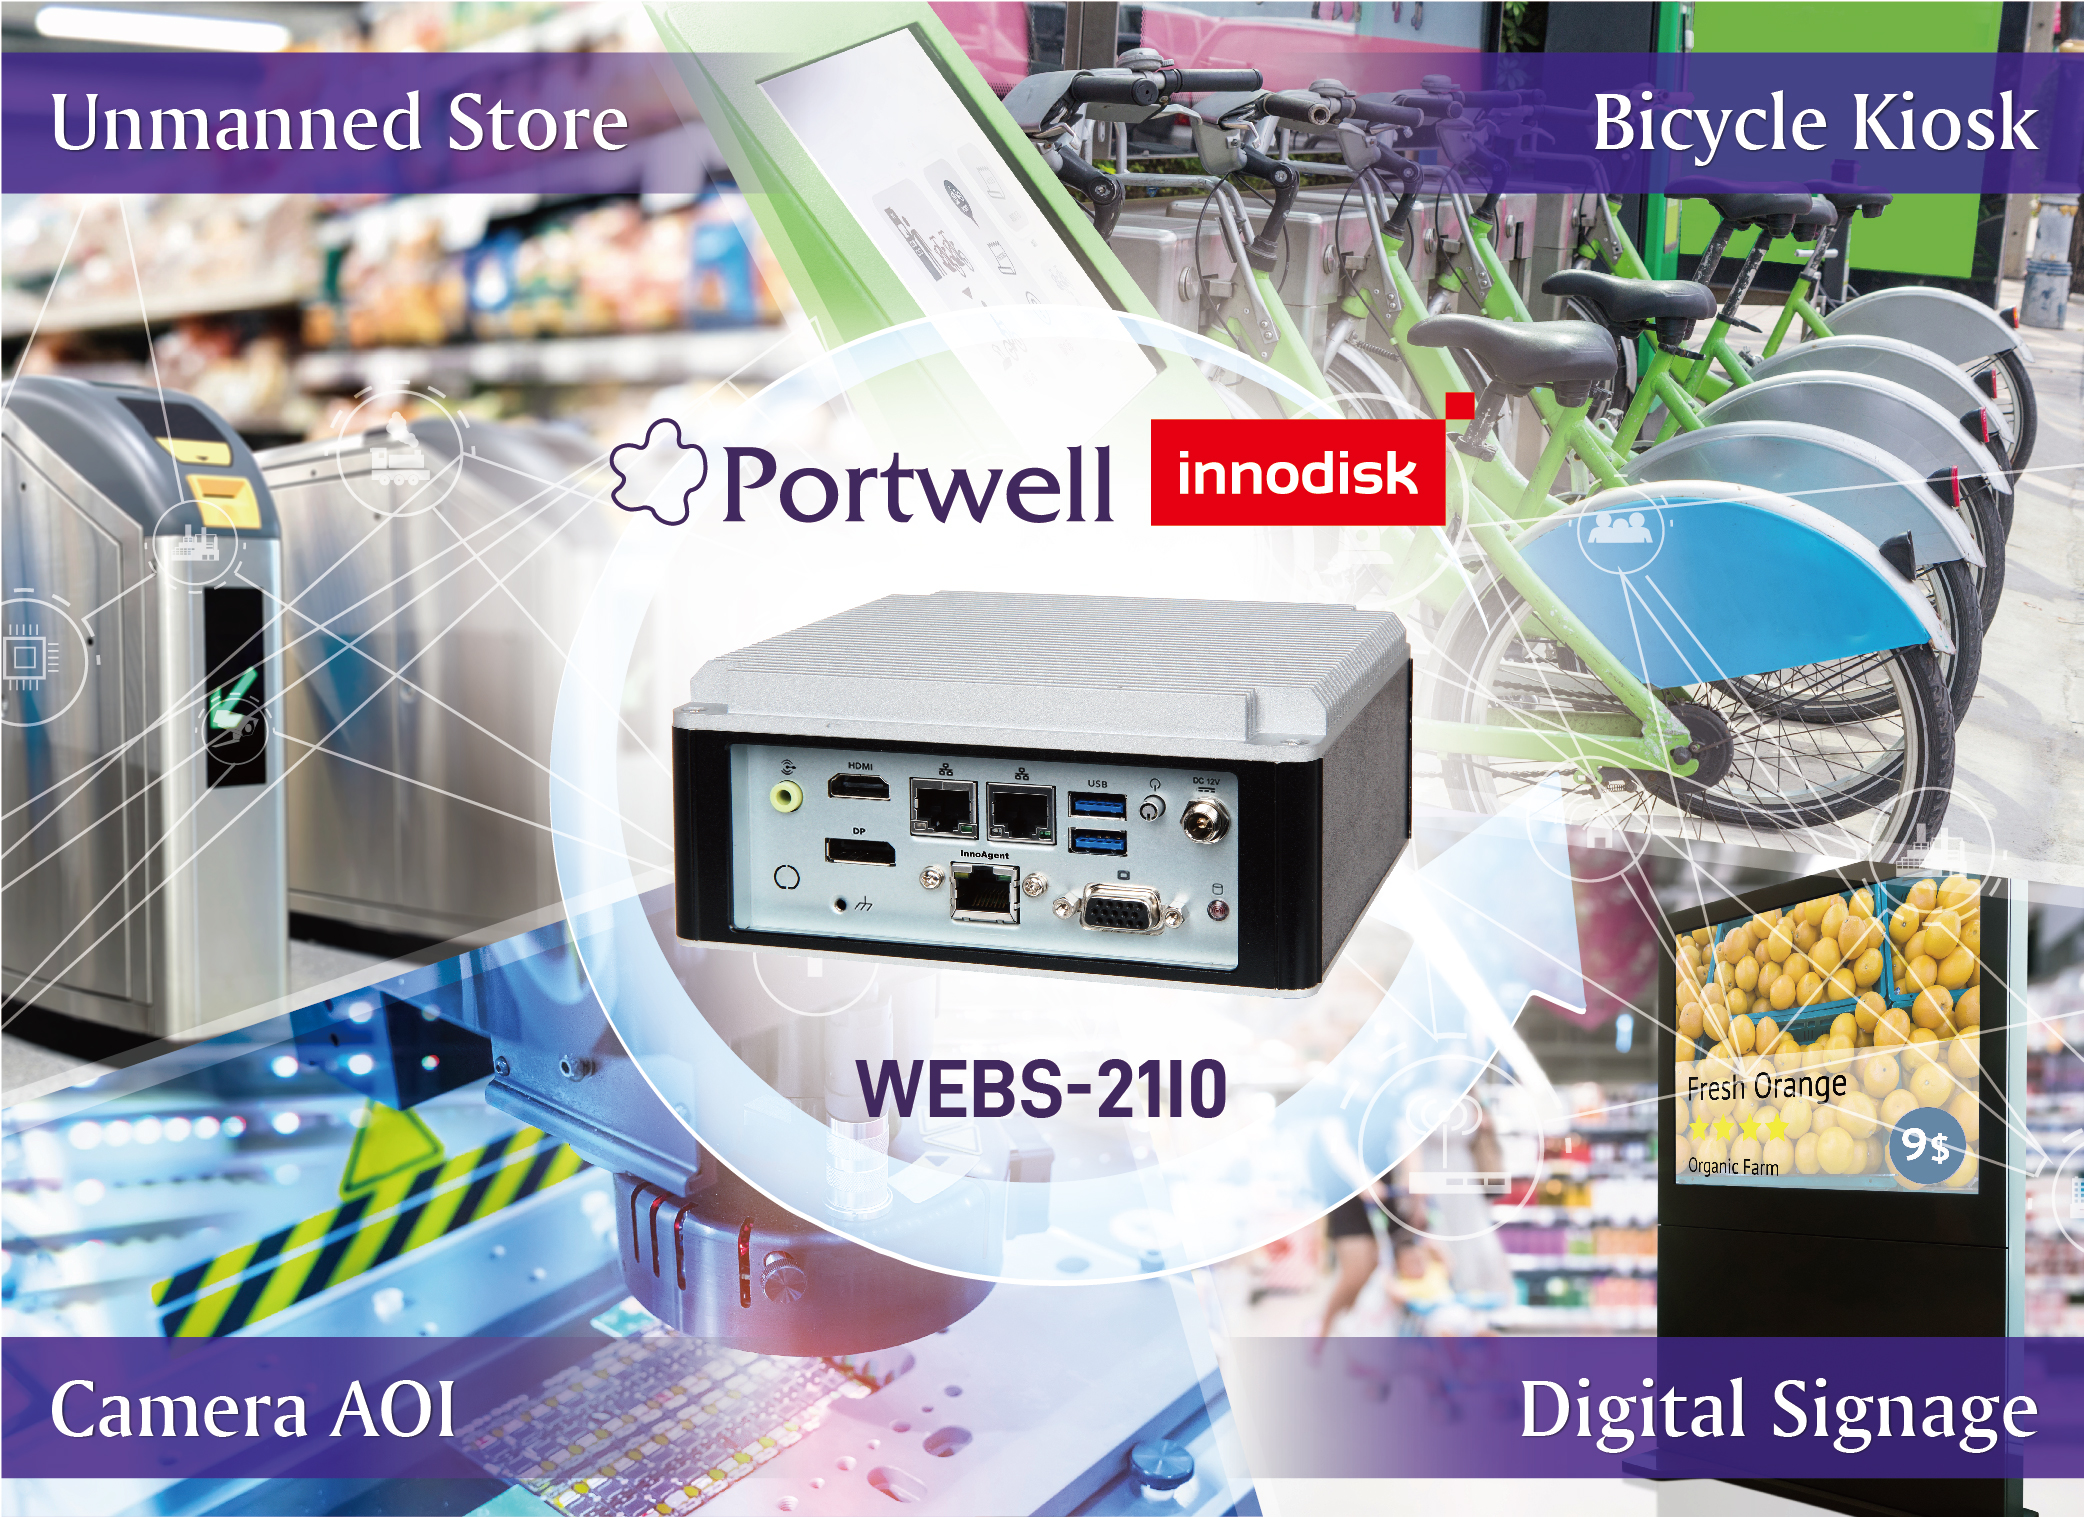 Portwell Partners with Innodisk in Advanced Technology to Deliver Embedded Systems Solutions, KIOSK Embedded Systems GmbH, Press Release